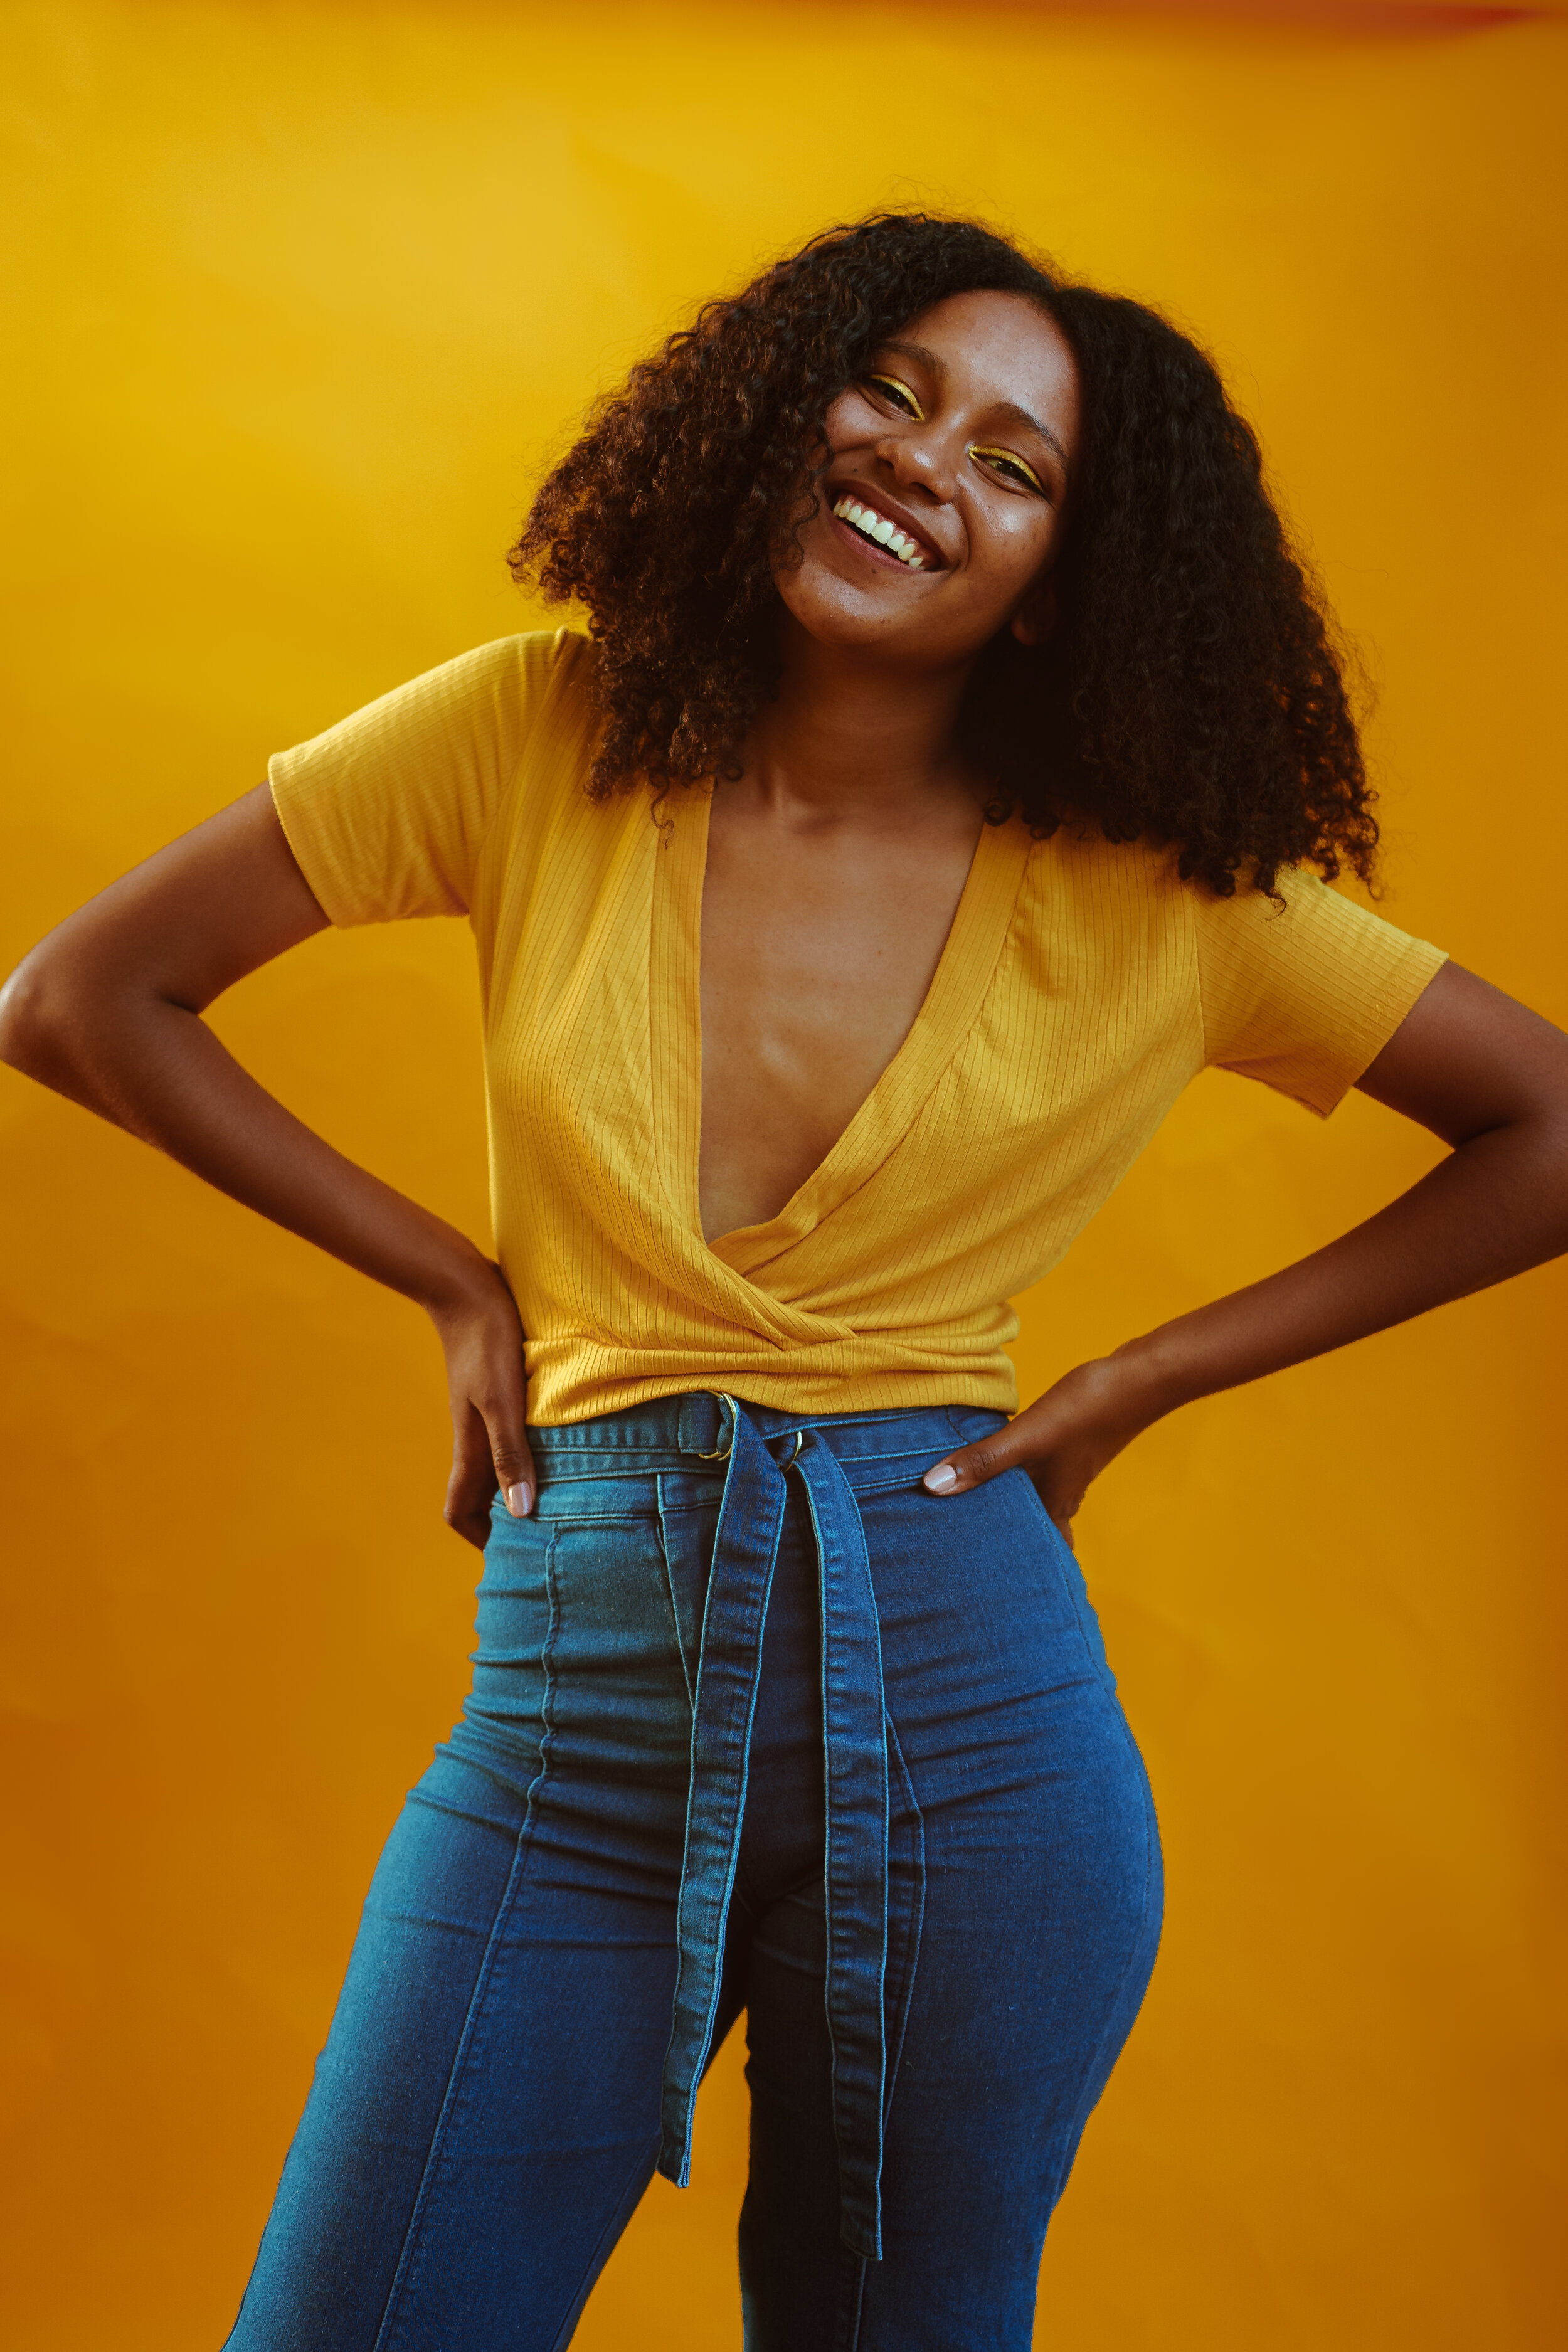 A Black Woman stands with her one hand on her hip, head tilted, smiling. The other hand is holding yellow flowers to the top of her head. She is wearing a yellow top and jeans and standing in front of a yellow background.